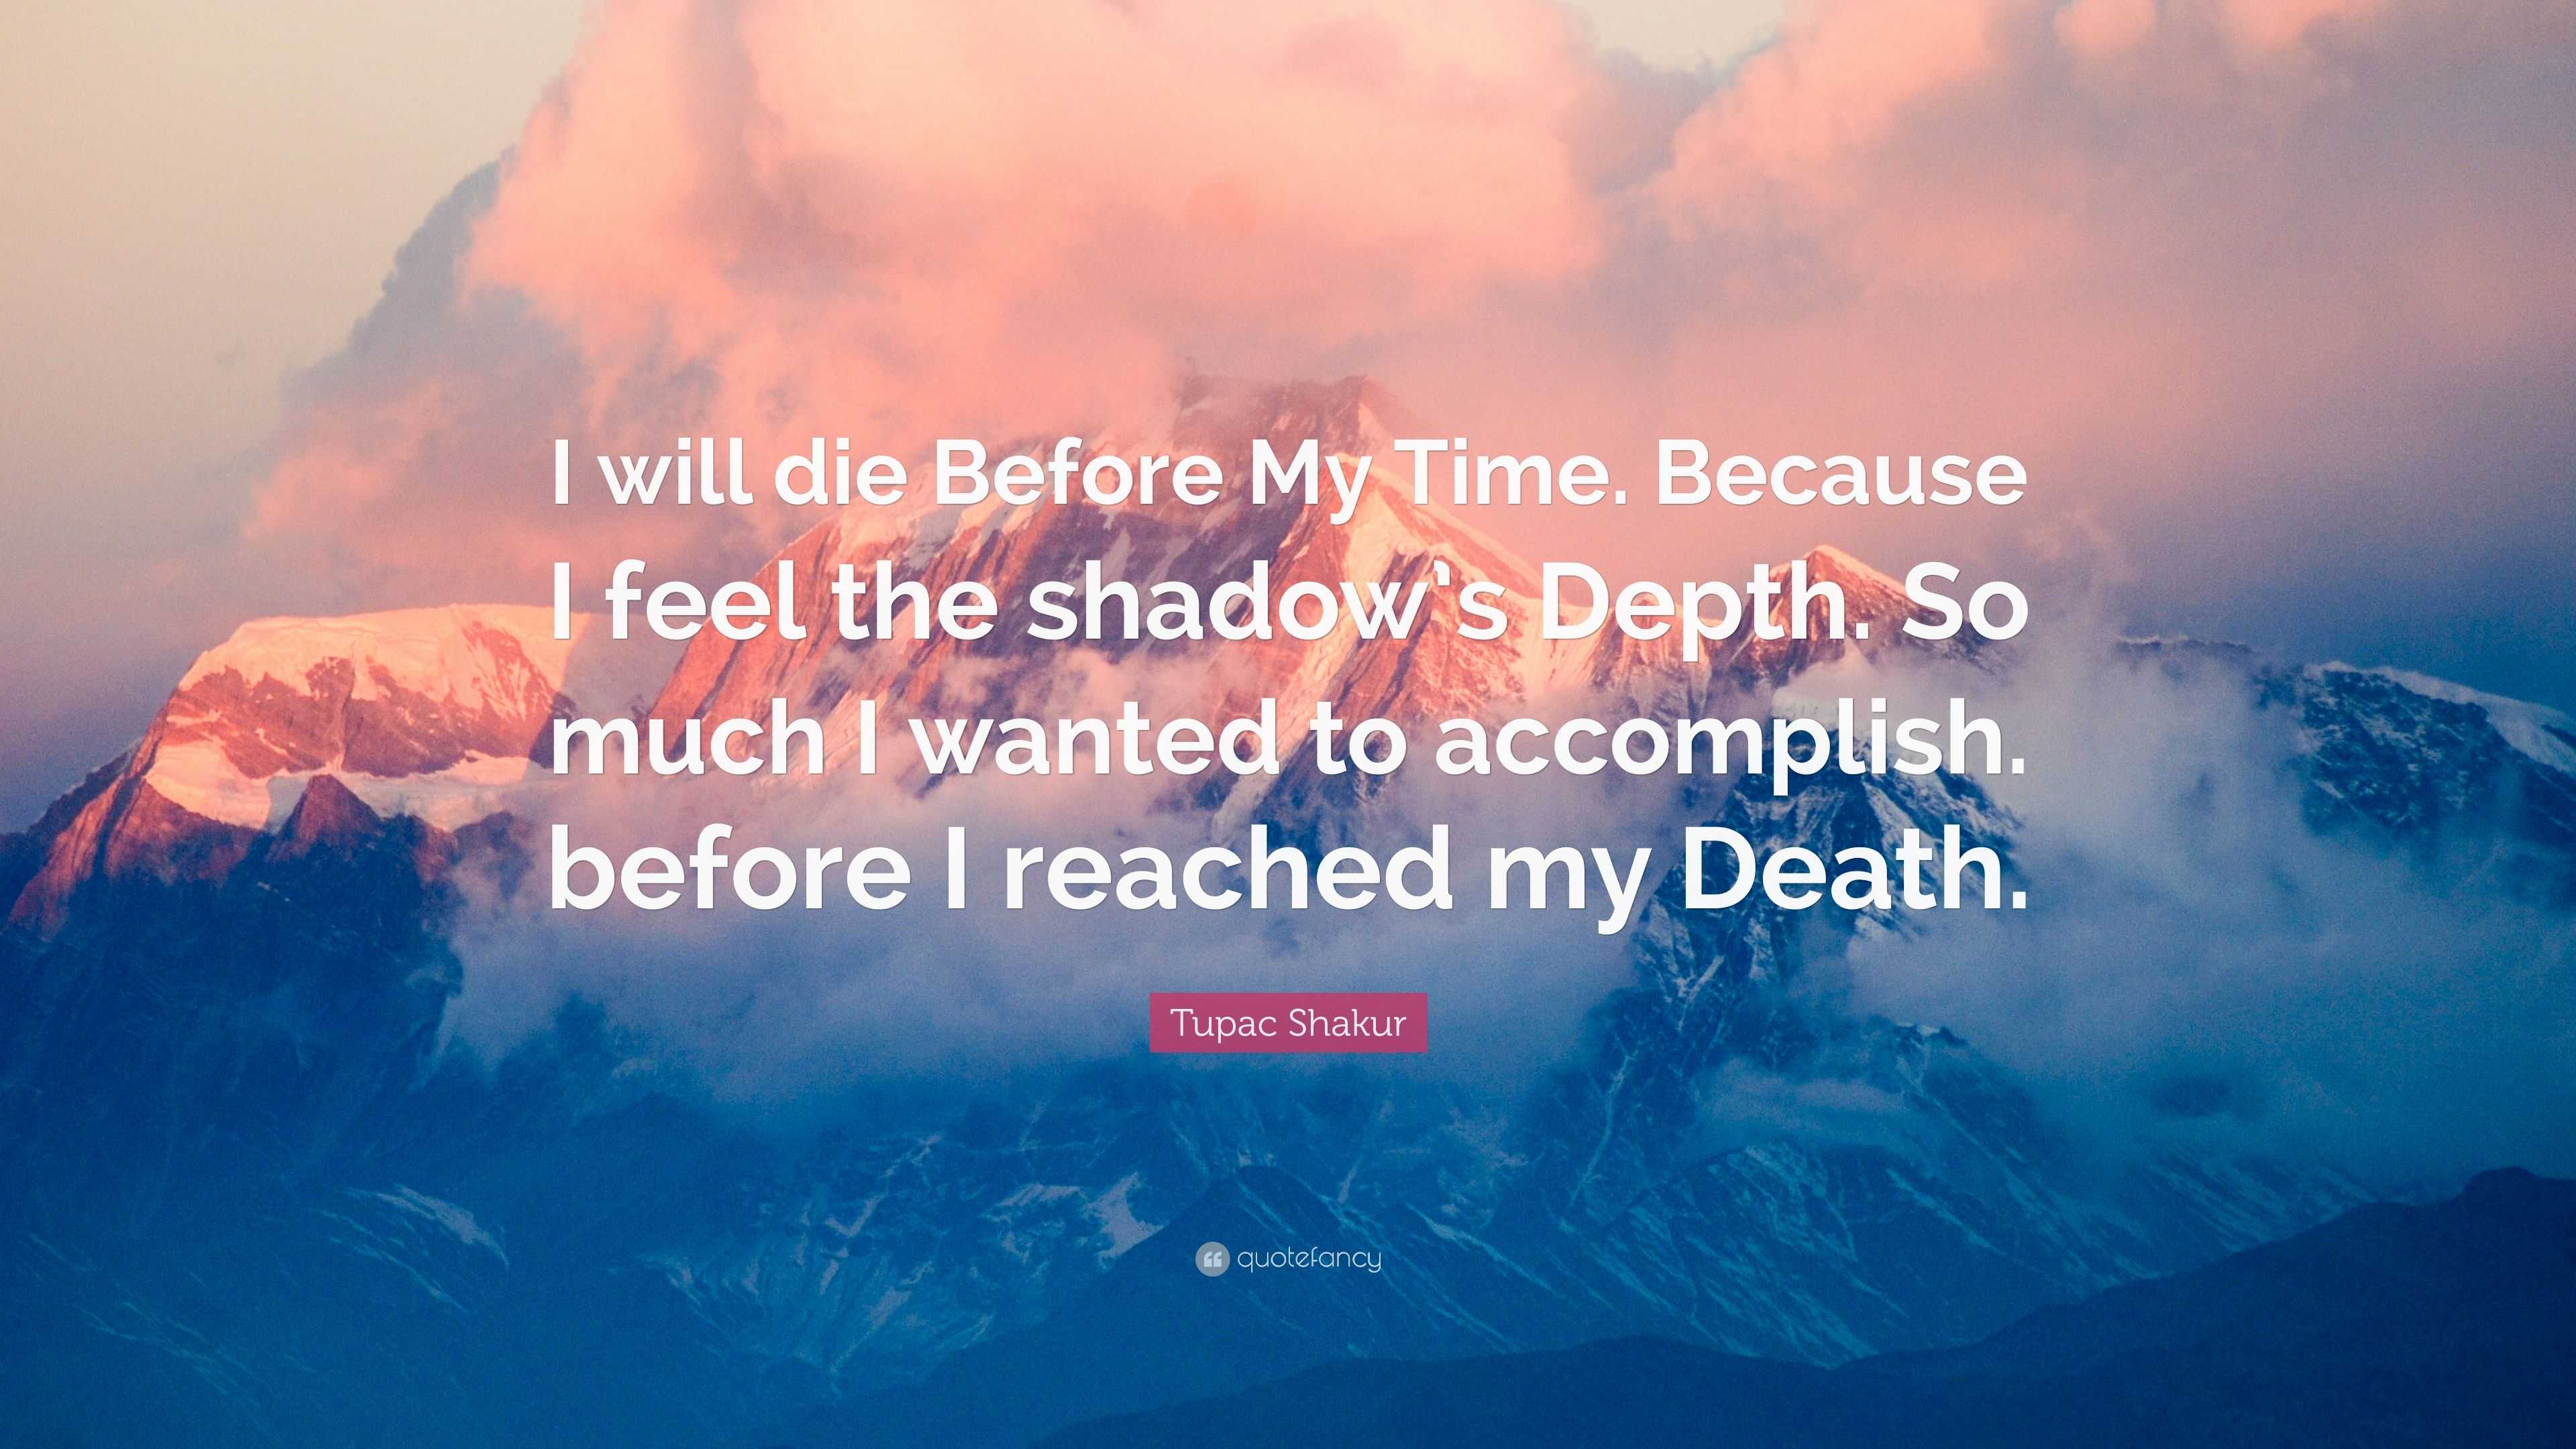 Tupac Shakur Quote: “I will die Before My Time. Because I feel the ...